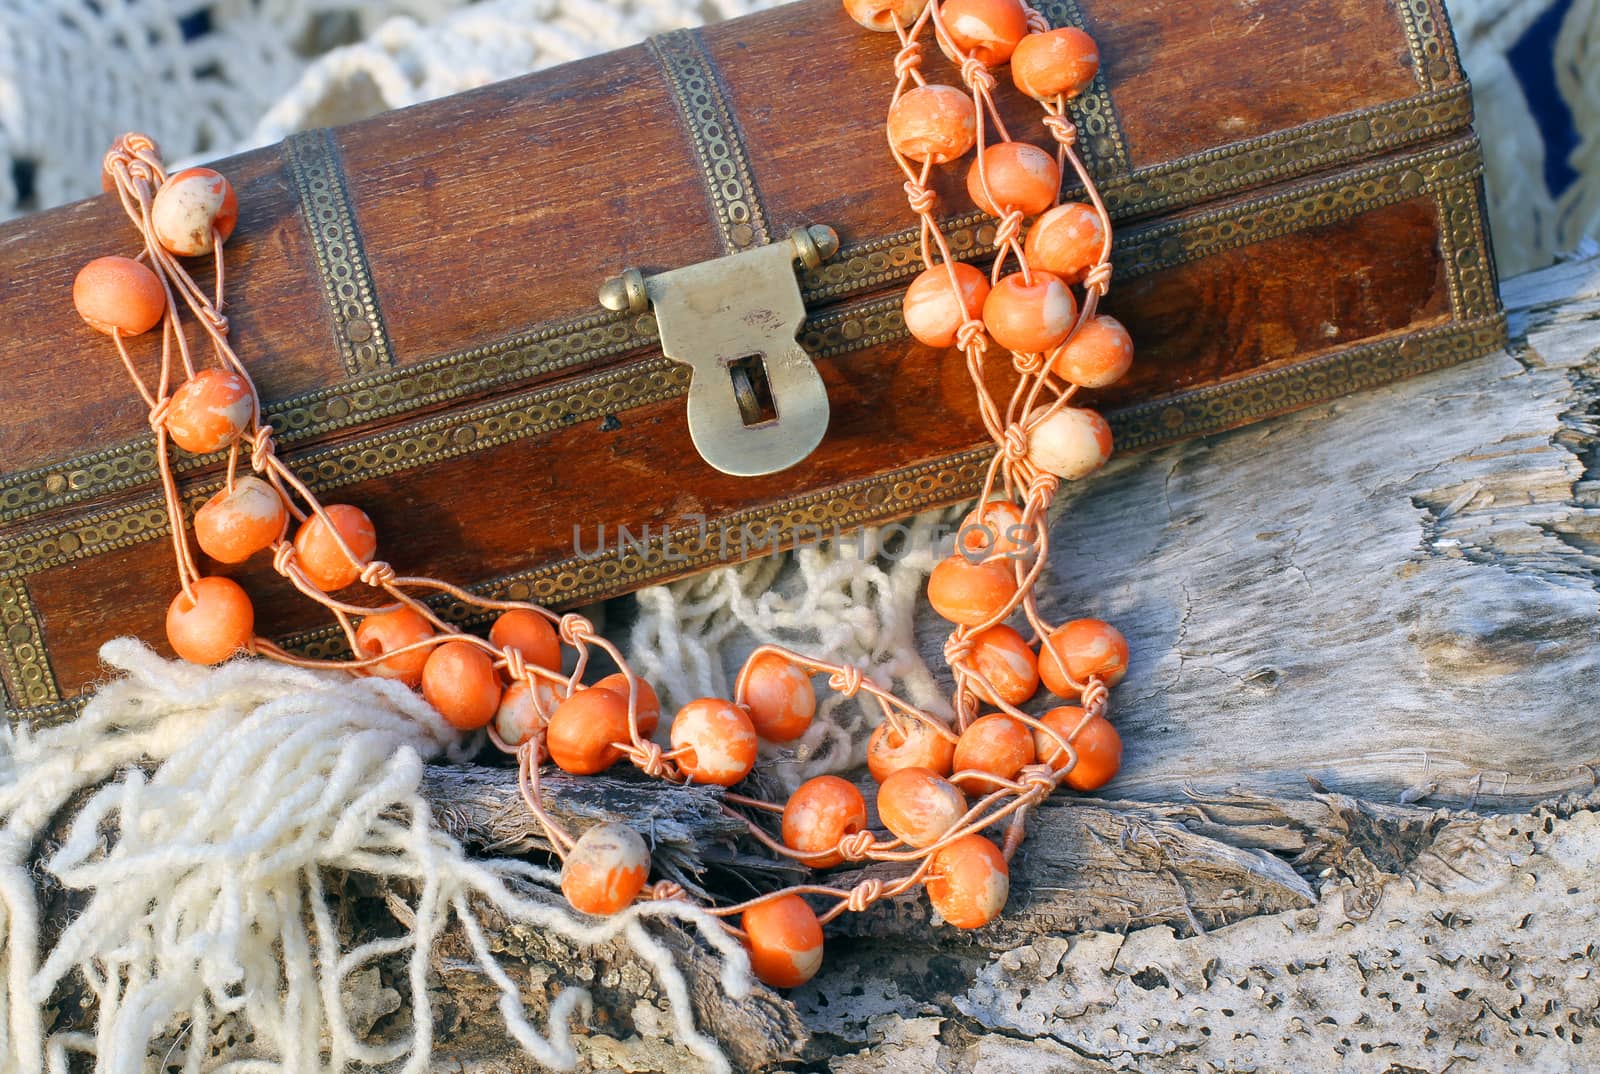 Ethnic handmade wooden necklace and old wooden chest on autumn-style background 